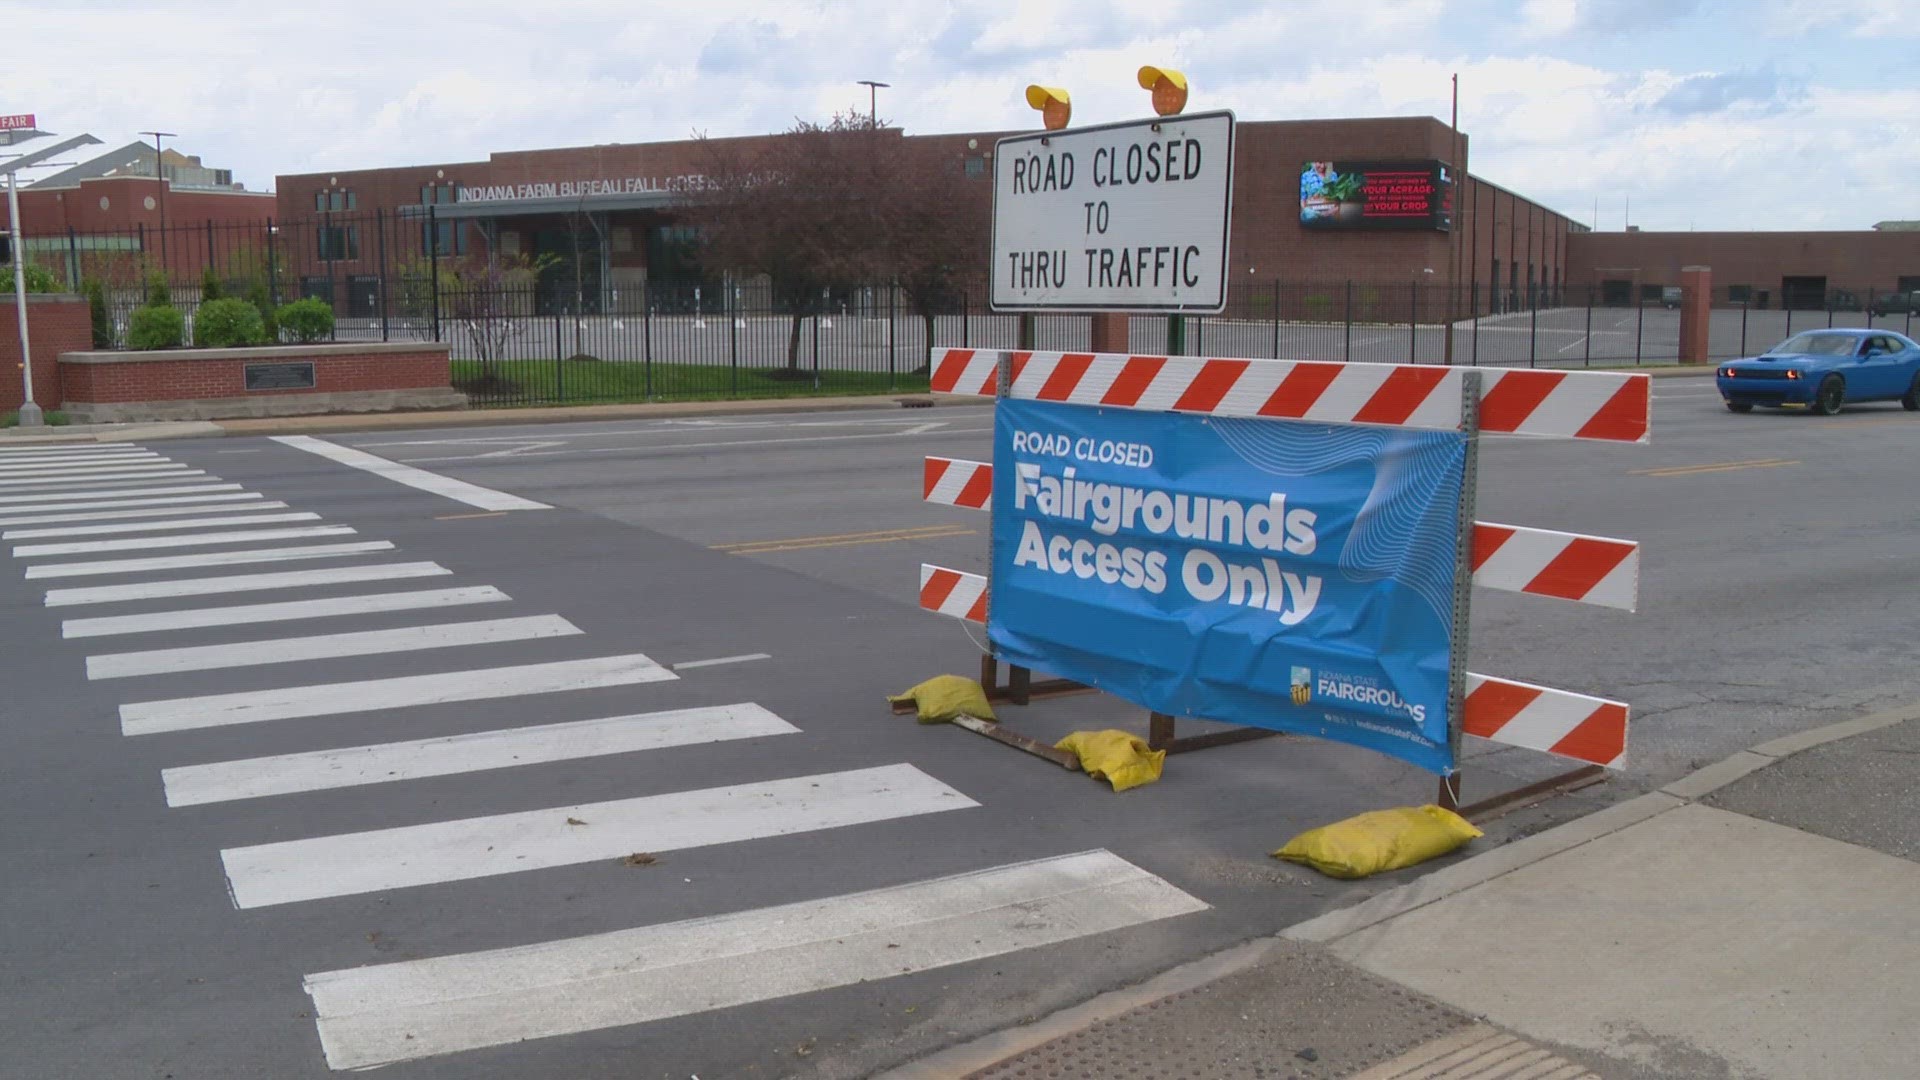 A big construction project is underway closing parts of Fall Creek Parkway near the state fairgrounds on the north side of Indy.